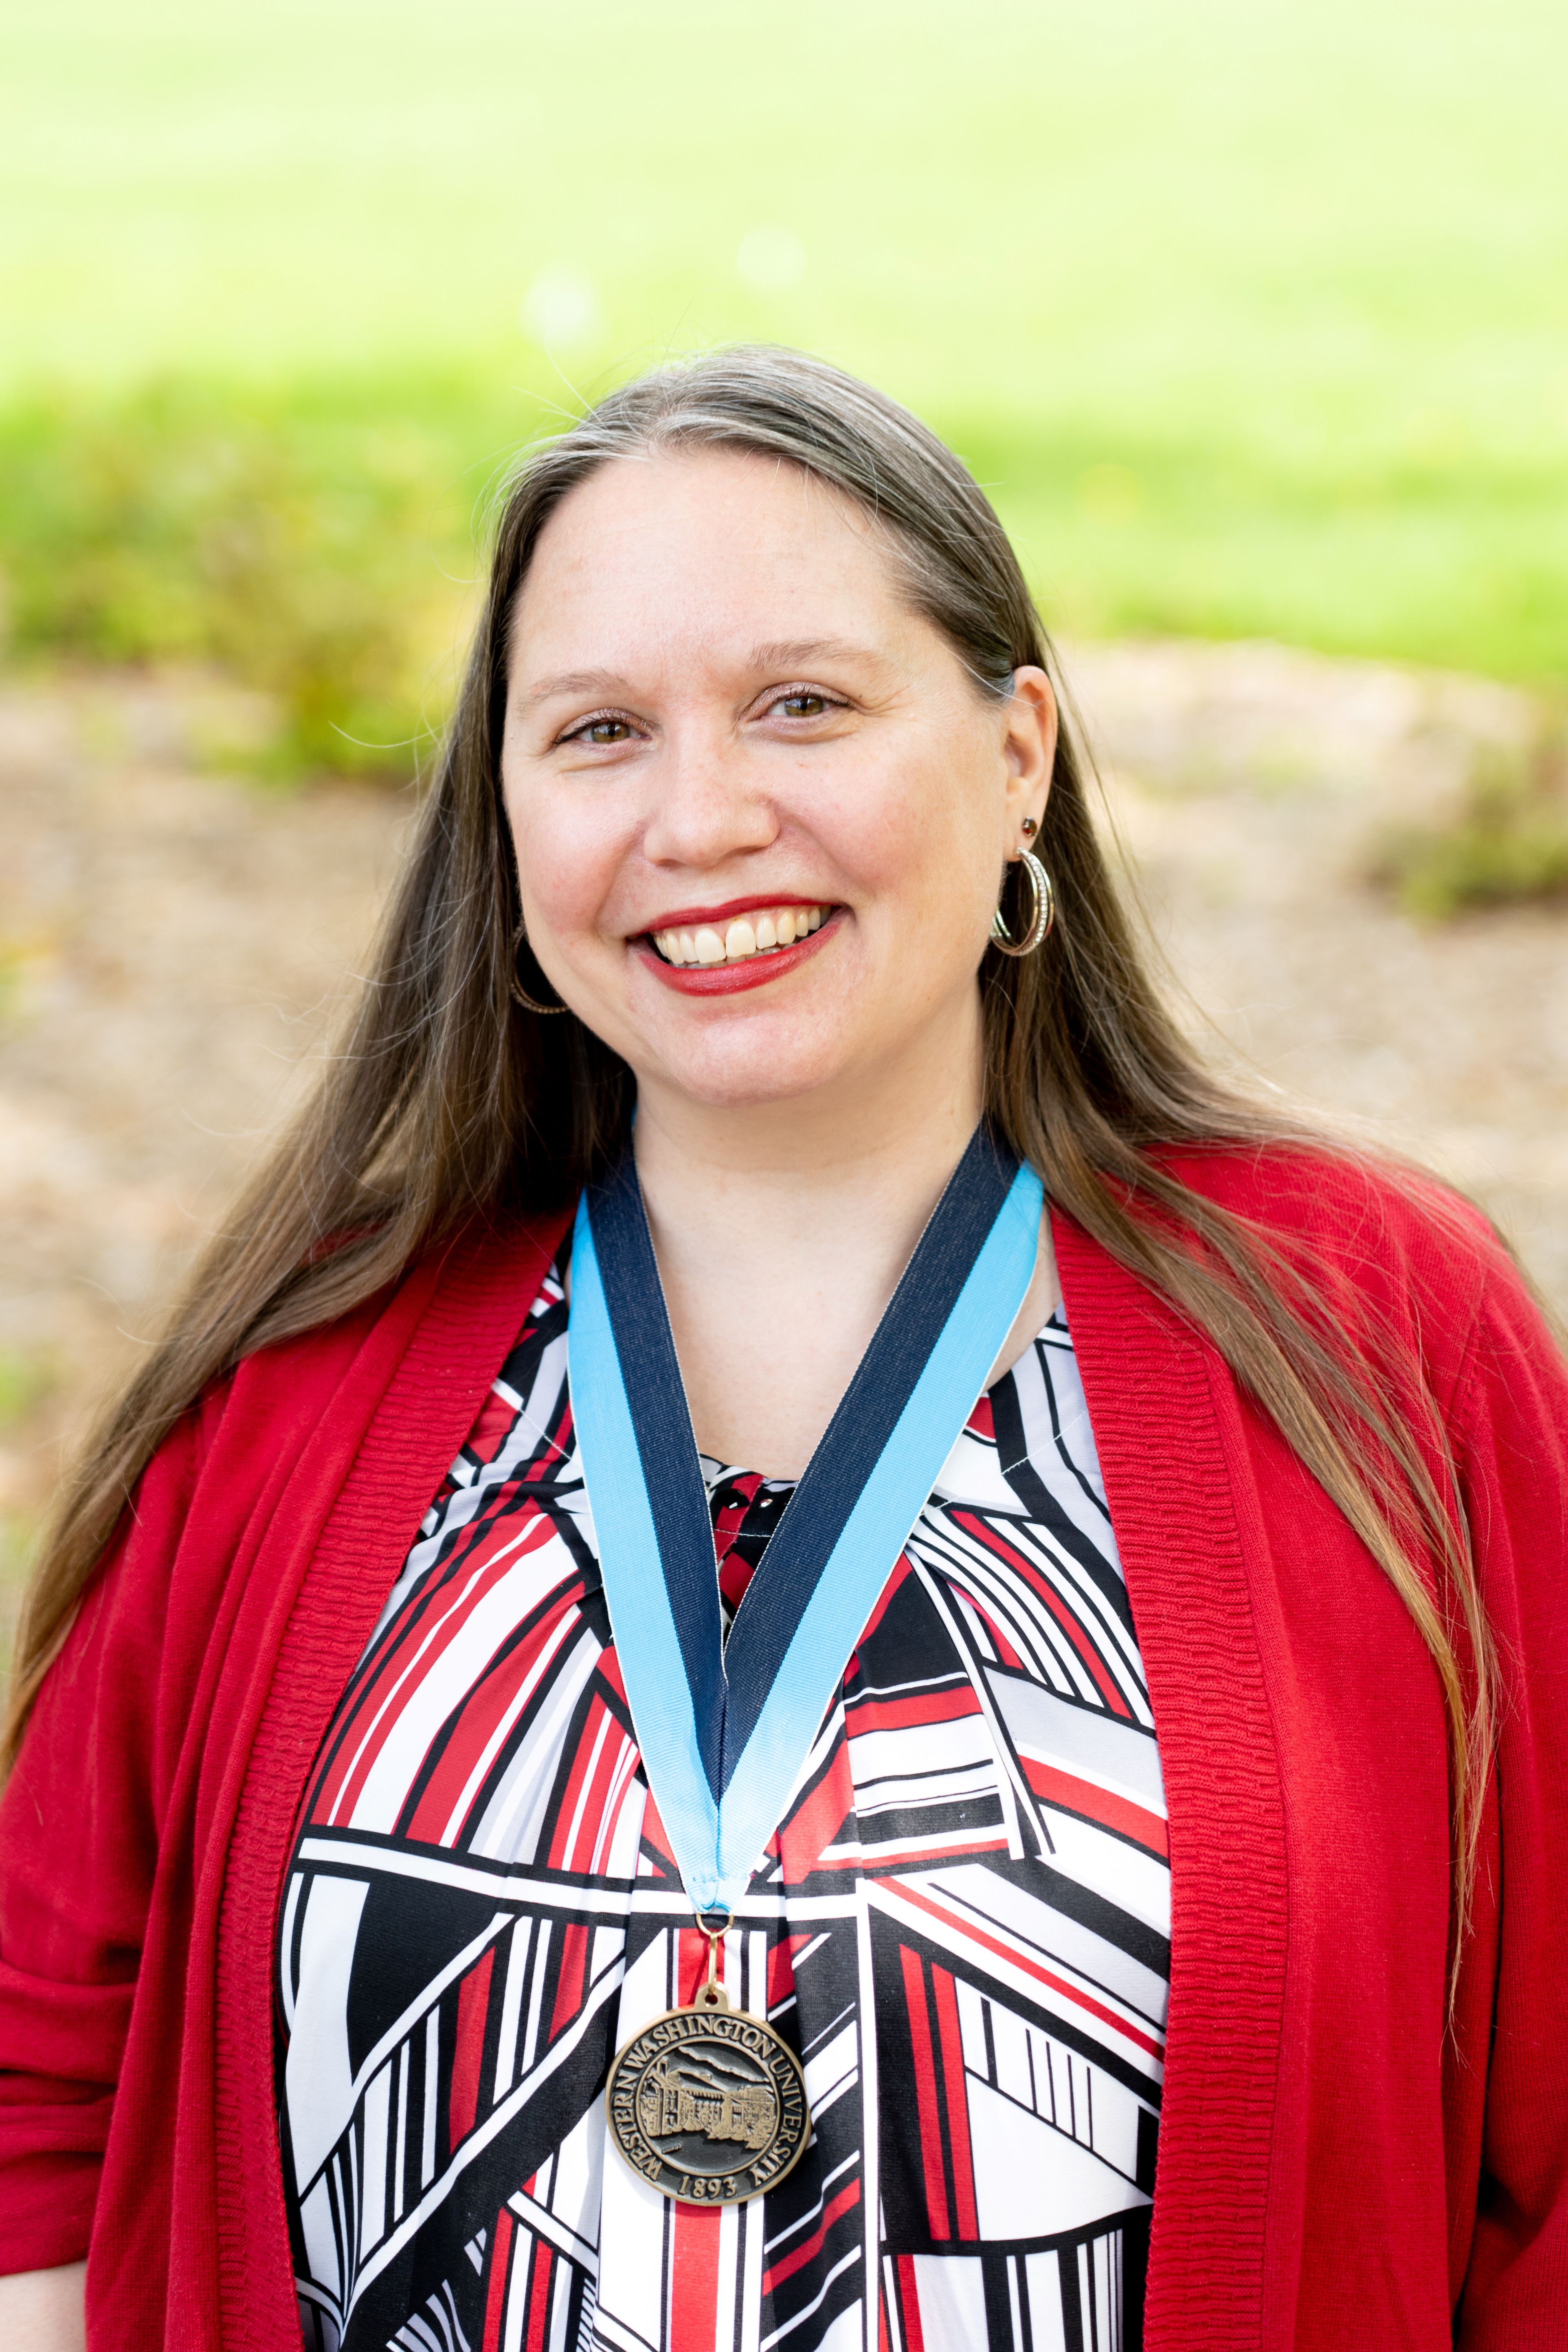 Stephanie Norsby smiling while wearing a bright red cardigan and a WWU award medallion on a neck ribbon